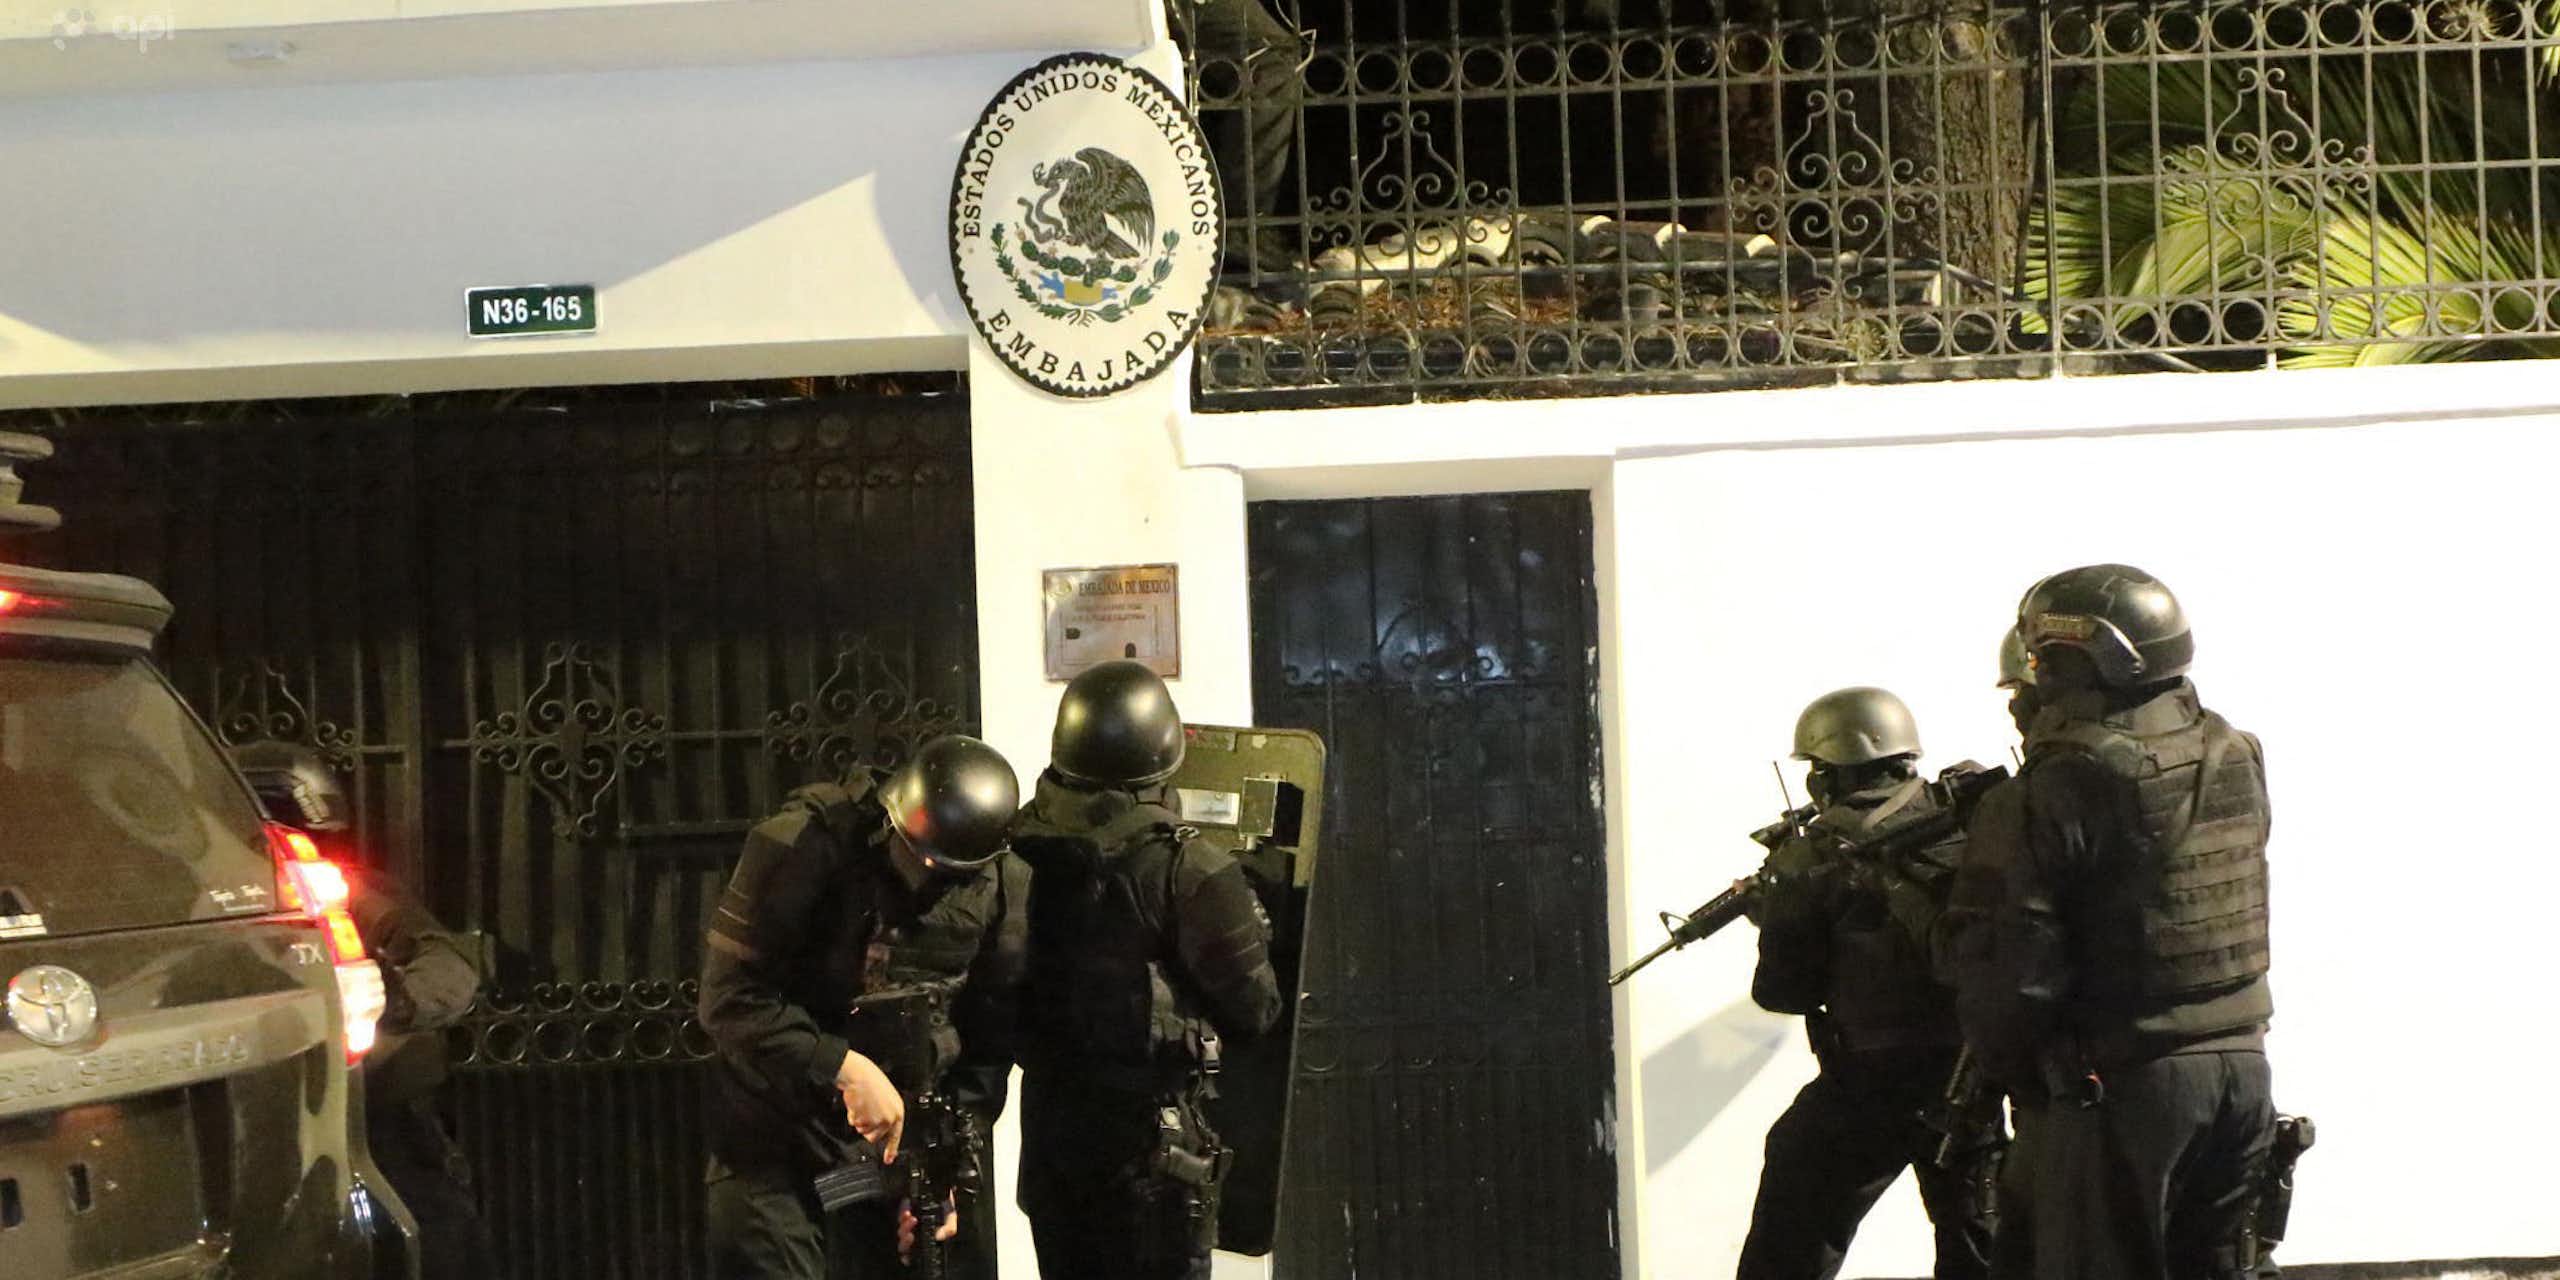 people in helmets and riot gear carrying guns stand outside a white building.